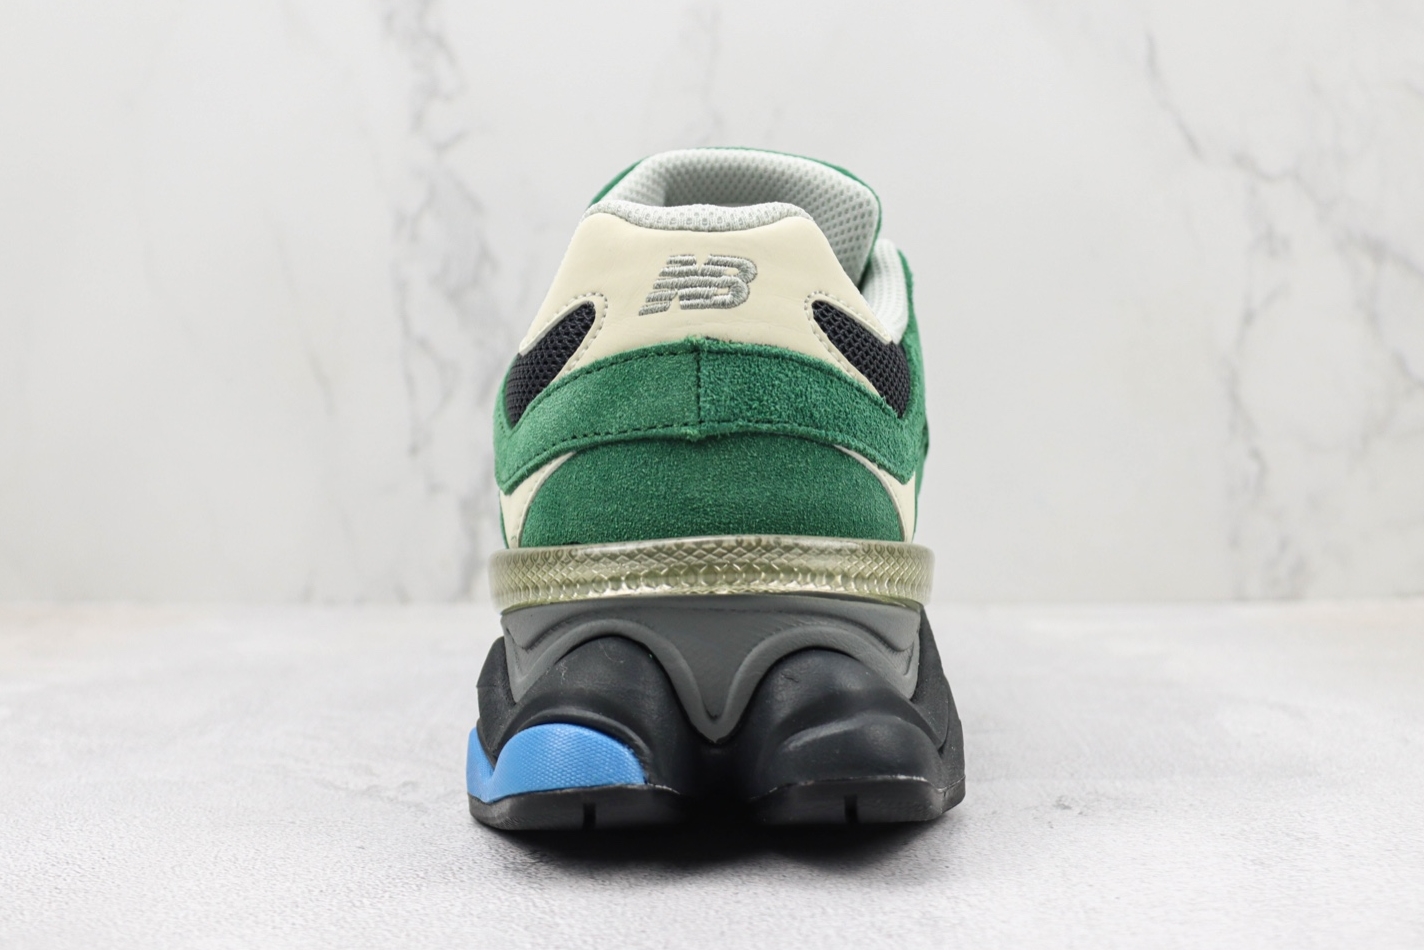 New Balance 9060 'Team Forest Green' U9060VRA - The Perfect Blend of Style and Performance